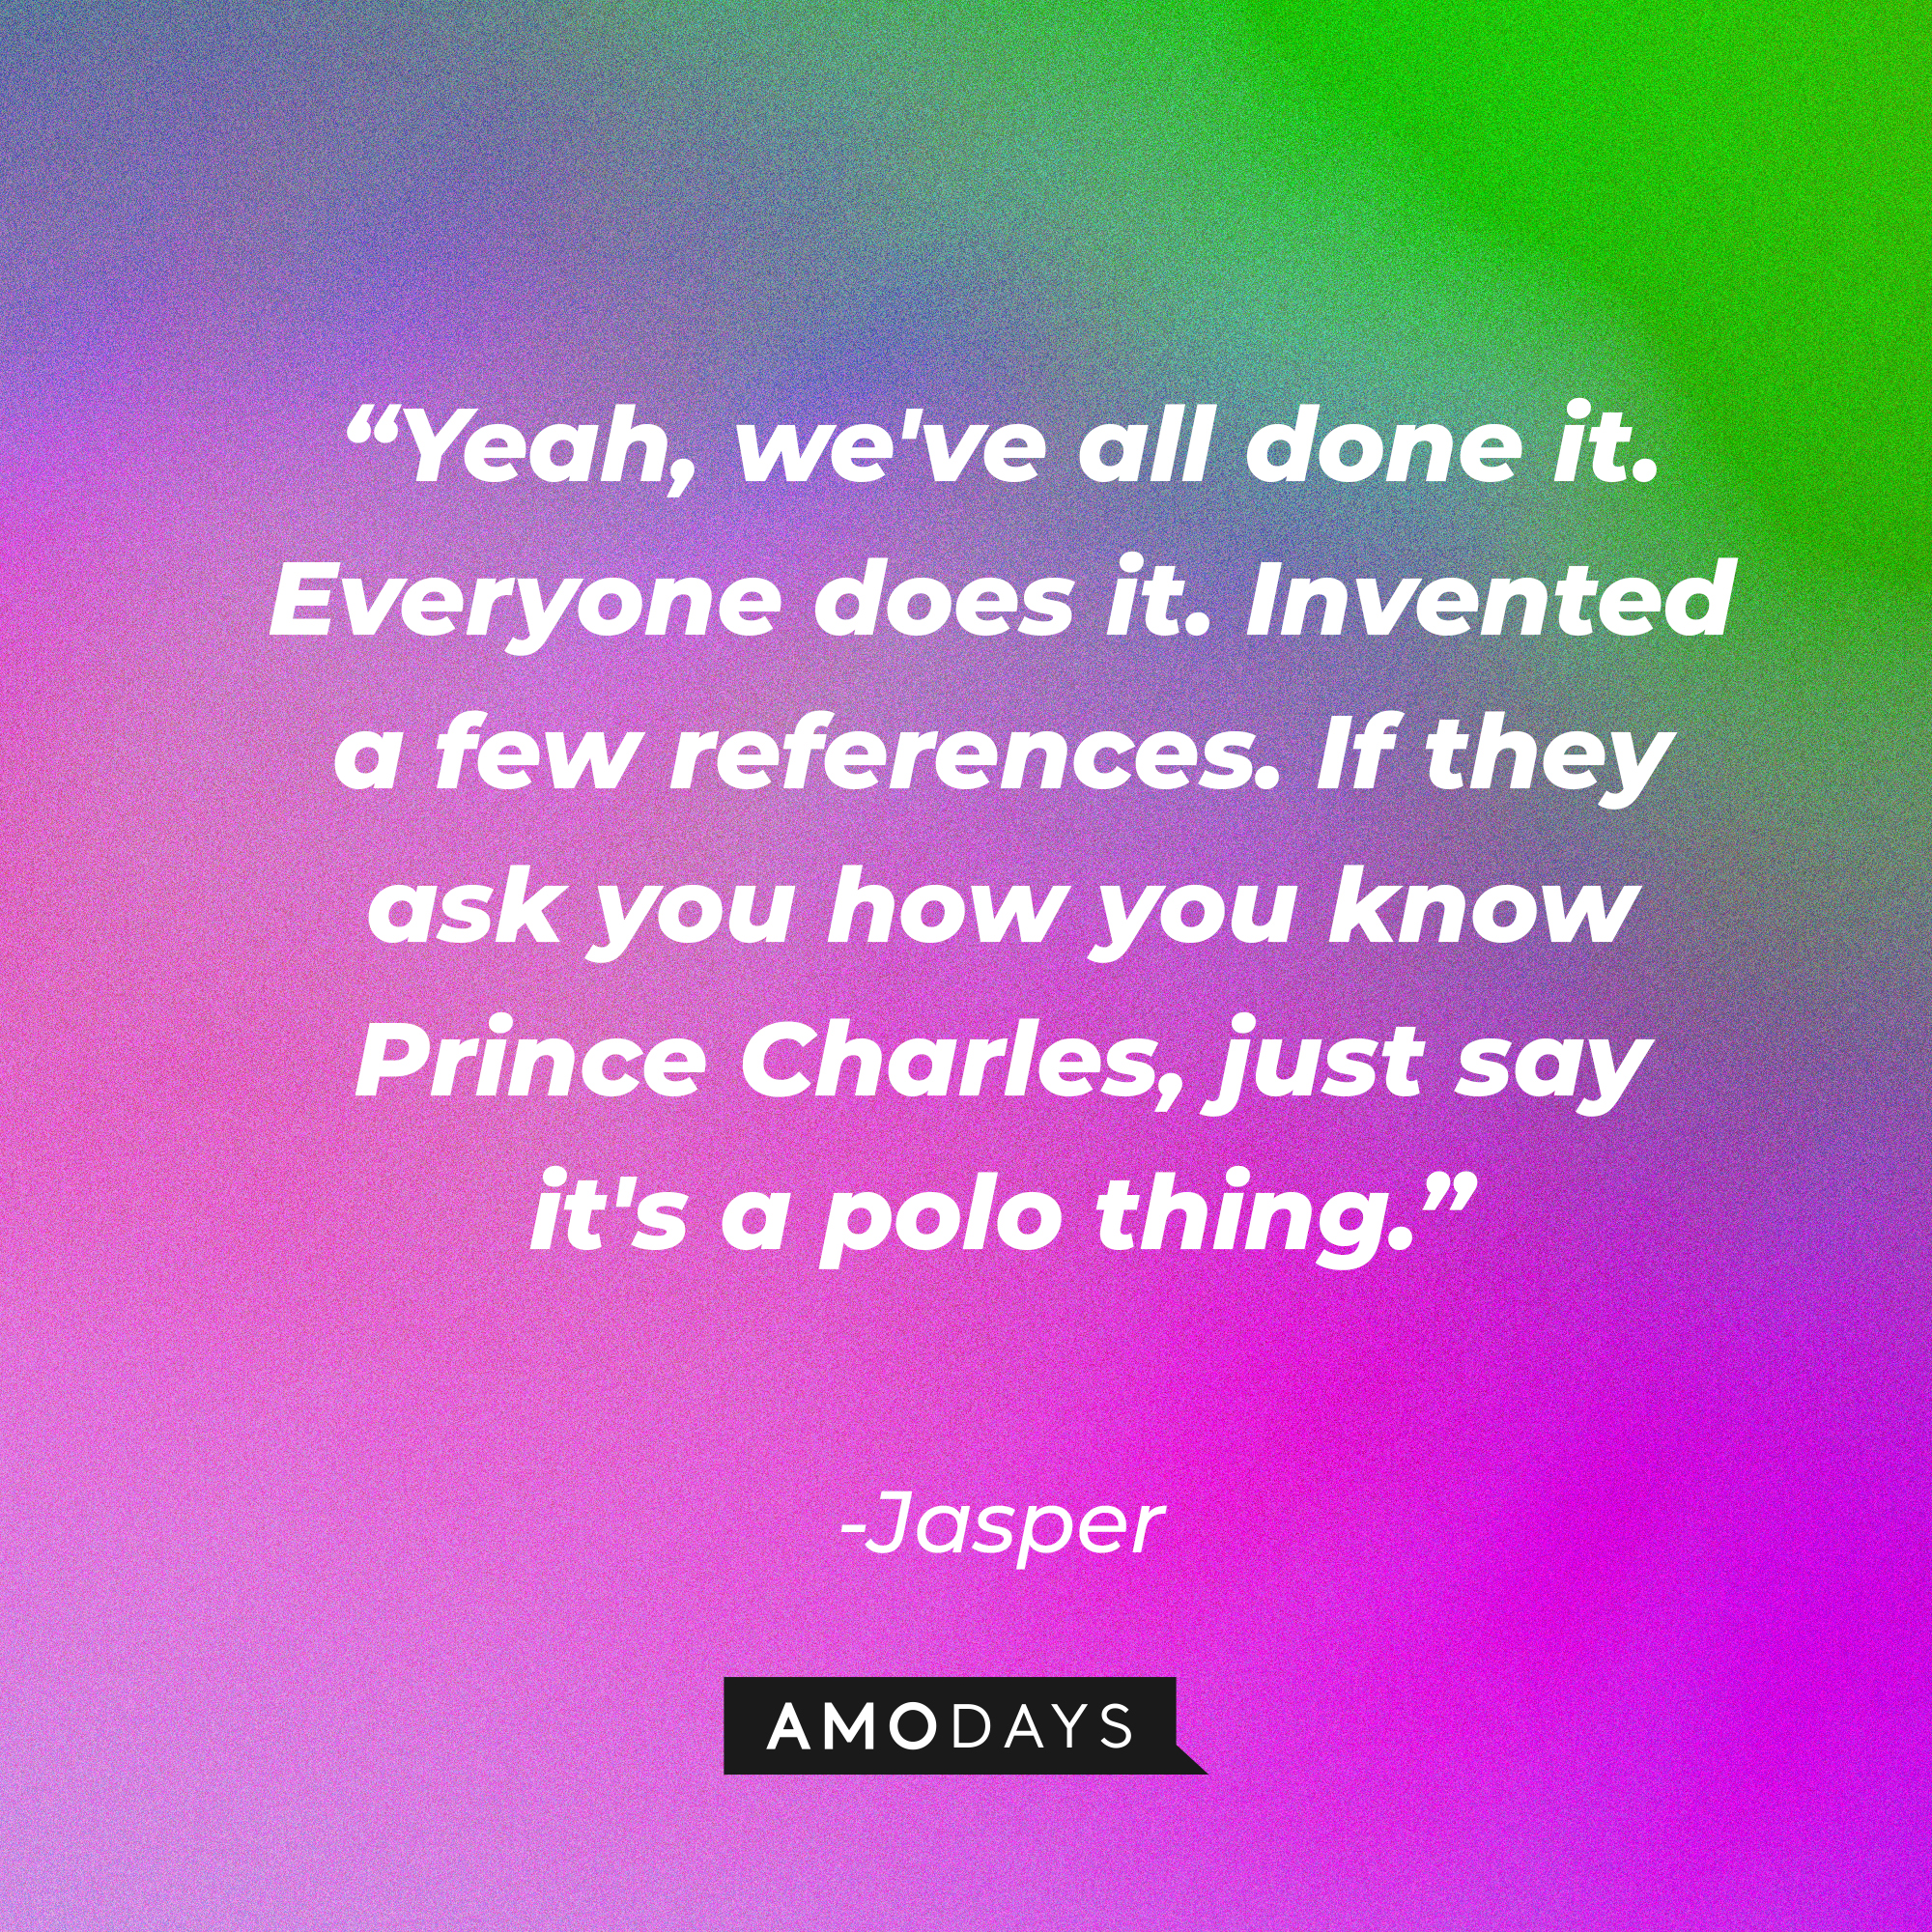 Jasper's quote: "Yeah, we've all done it. Everyone does it. Invented a few references. If they ask you how you know Prince Charles, just say it's a polo thing." | Source: Amodays